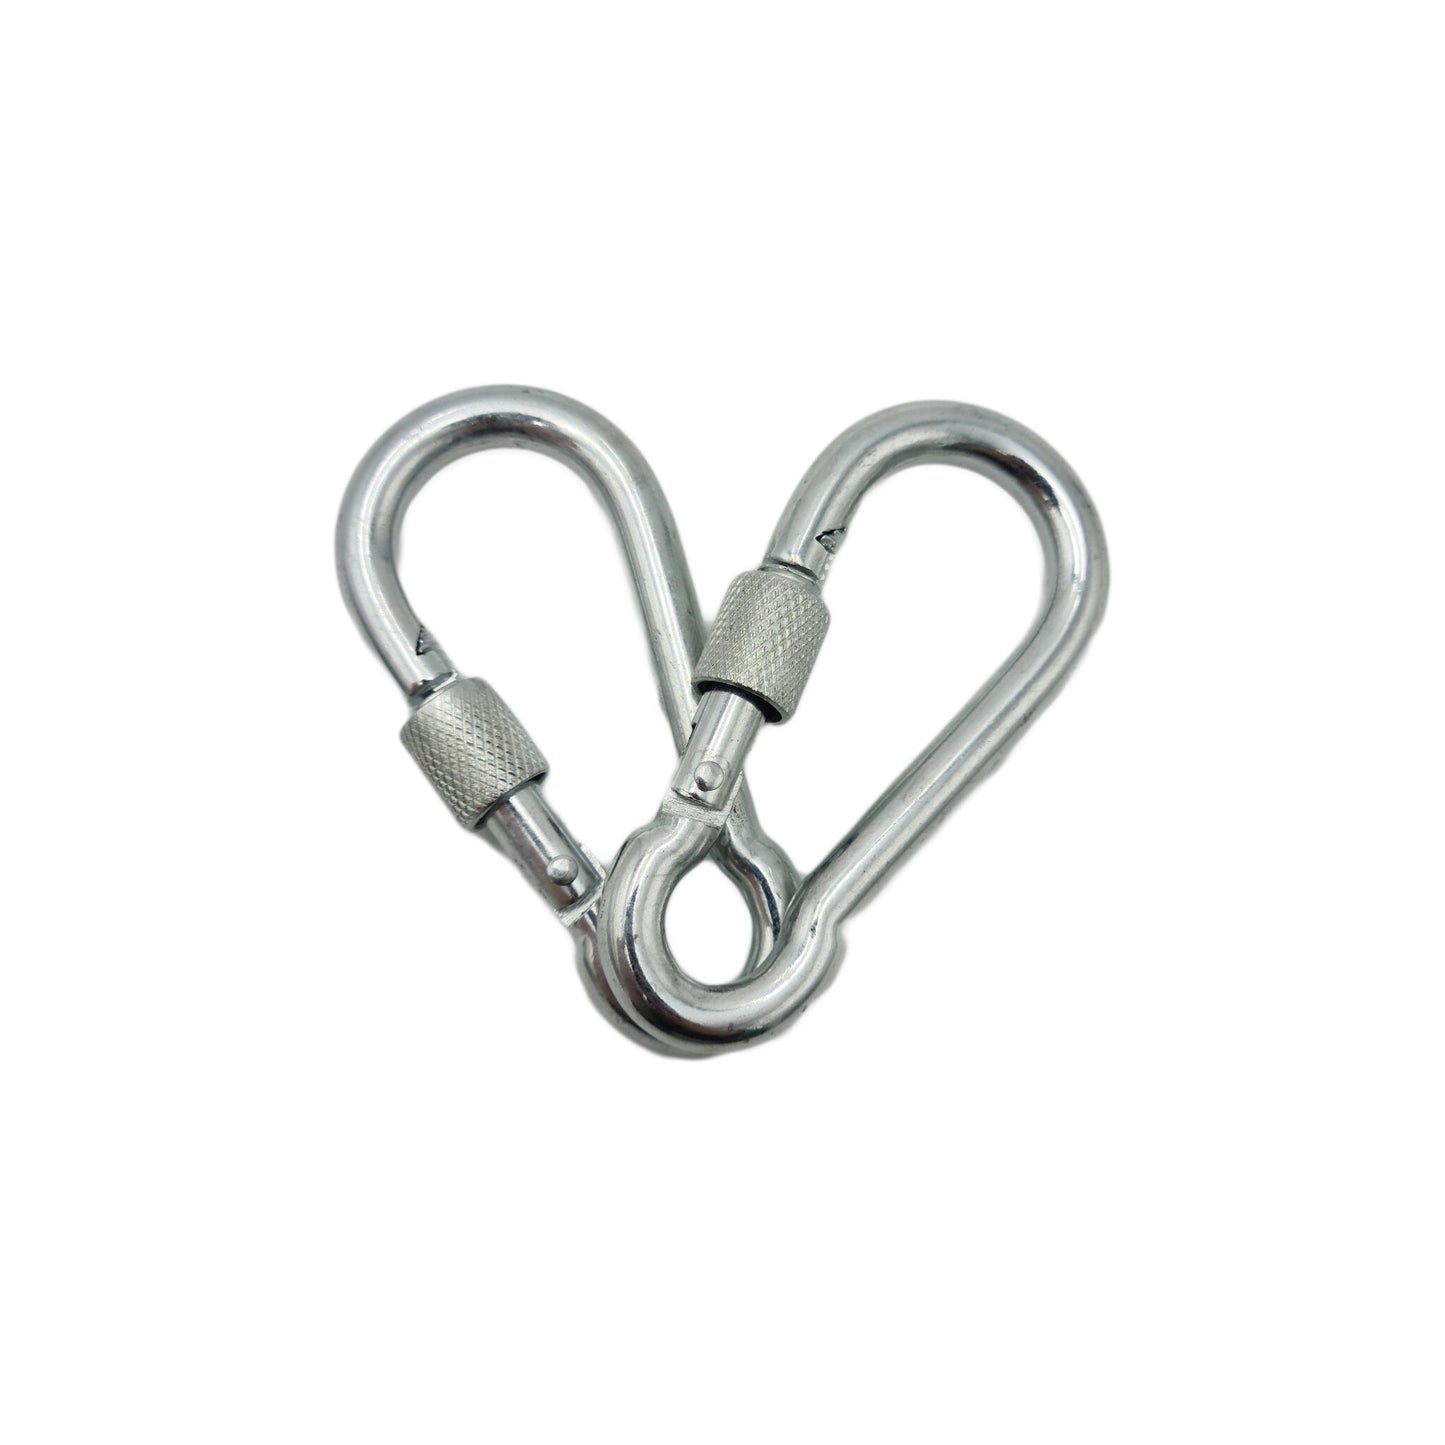 Double Carabiners for Magnet Fishing